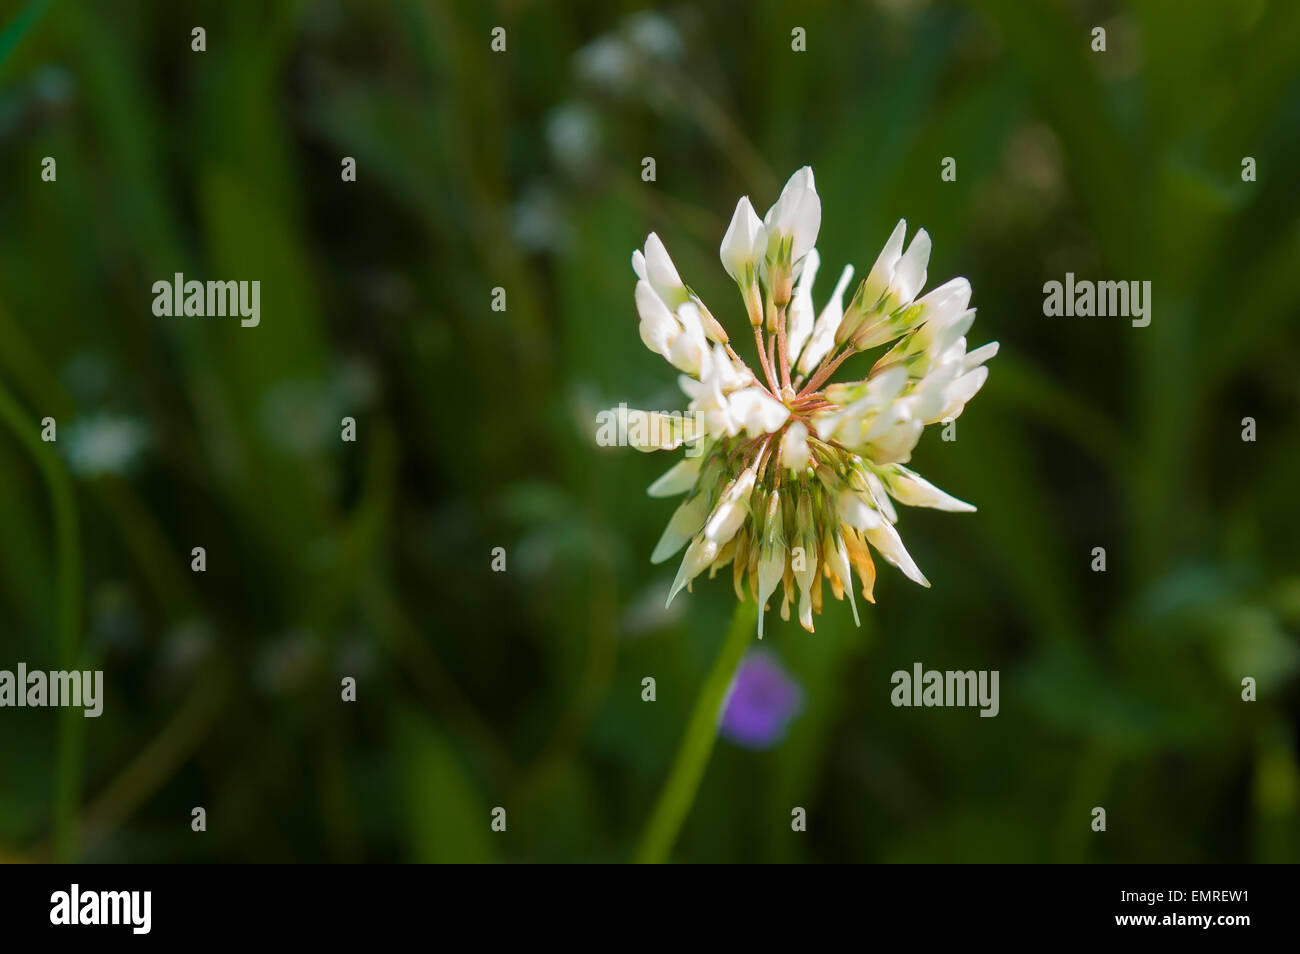 A nice white clover flower on a green grass background Stock Photo